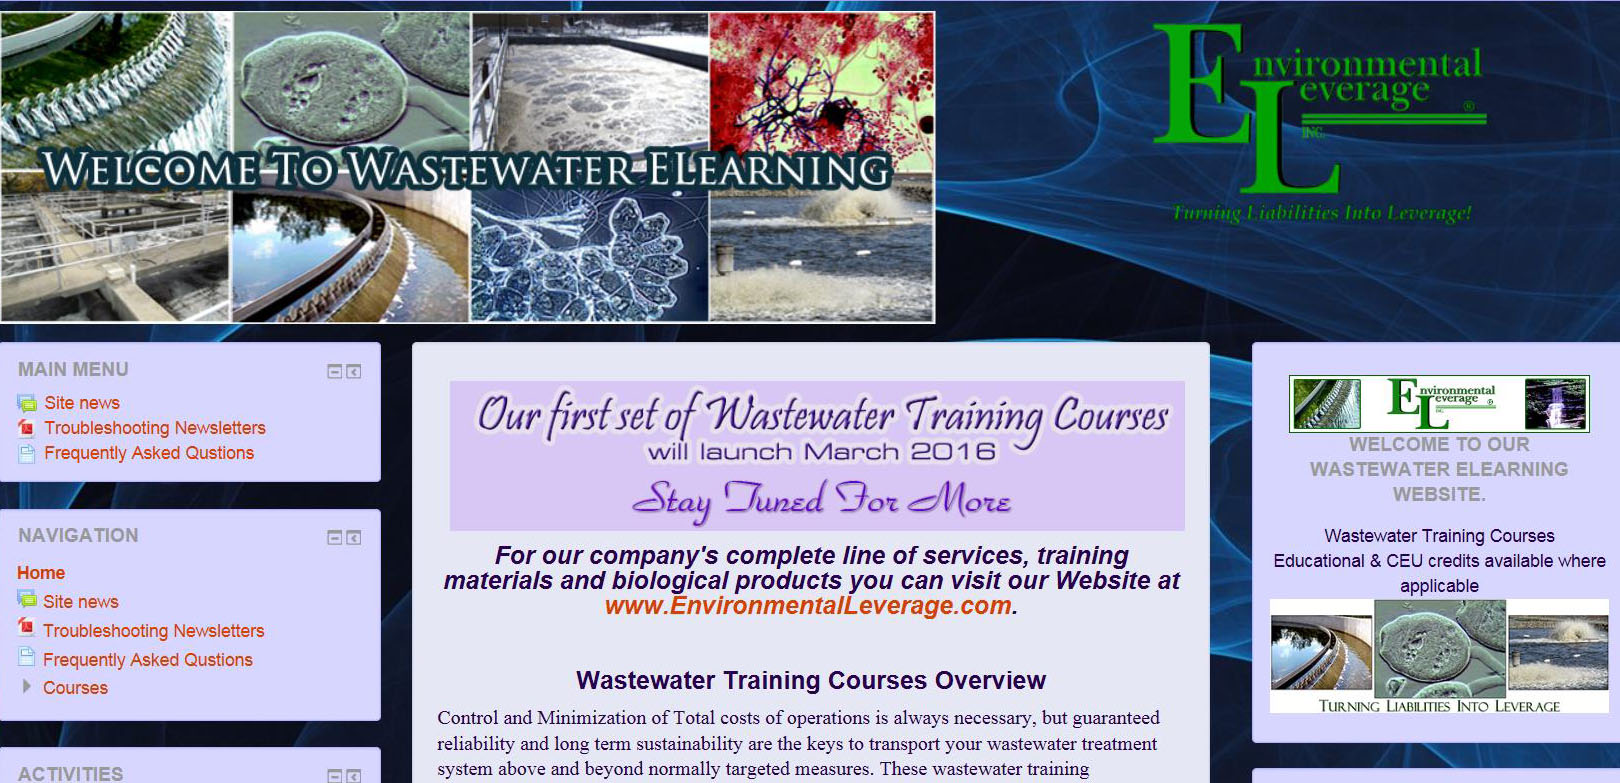 WAstewater Elearning